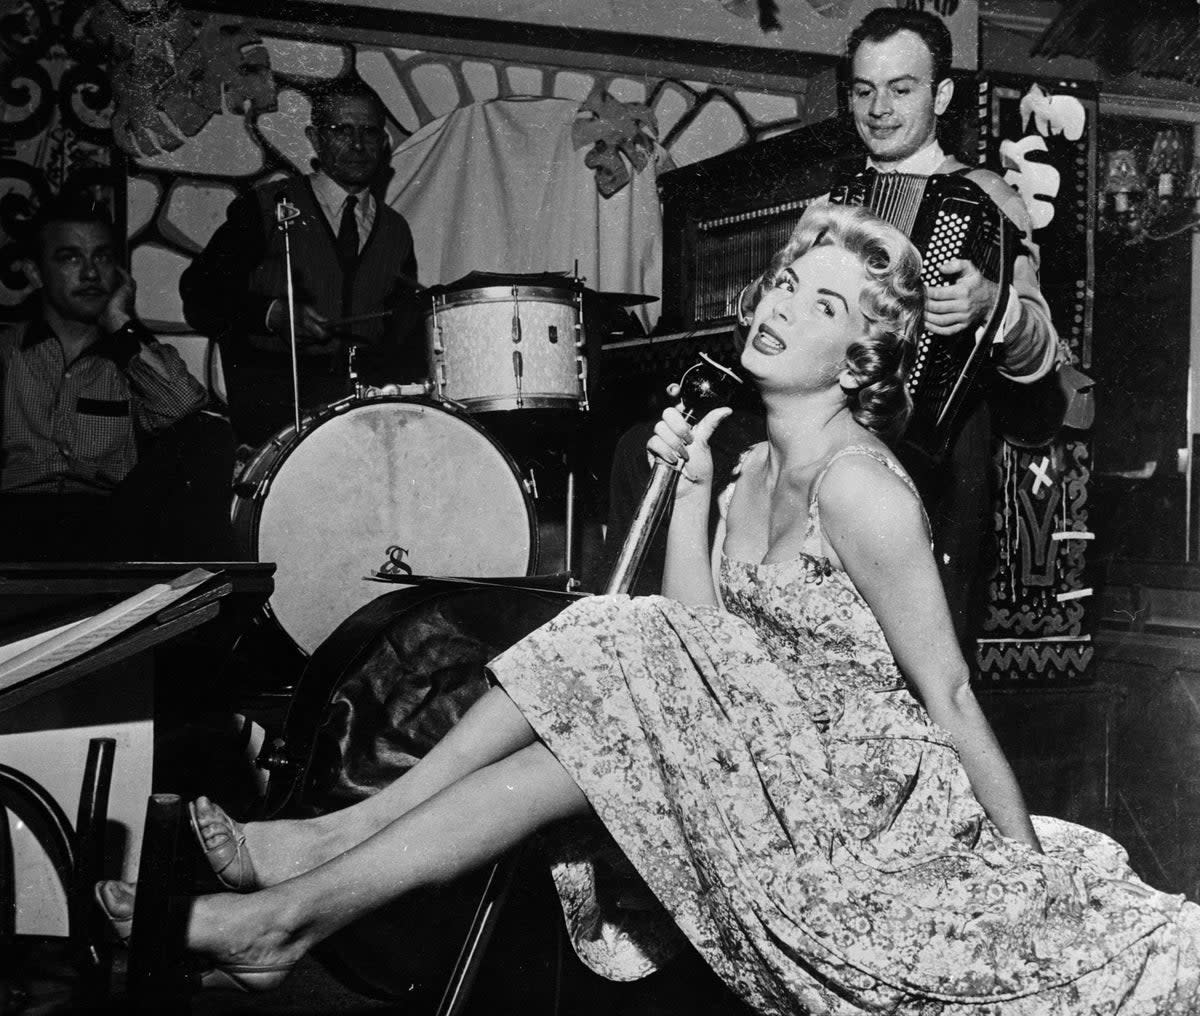 The cabaret star on stage in the French Riviera  (Getty Images)